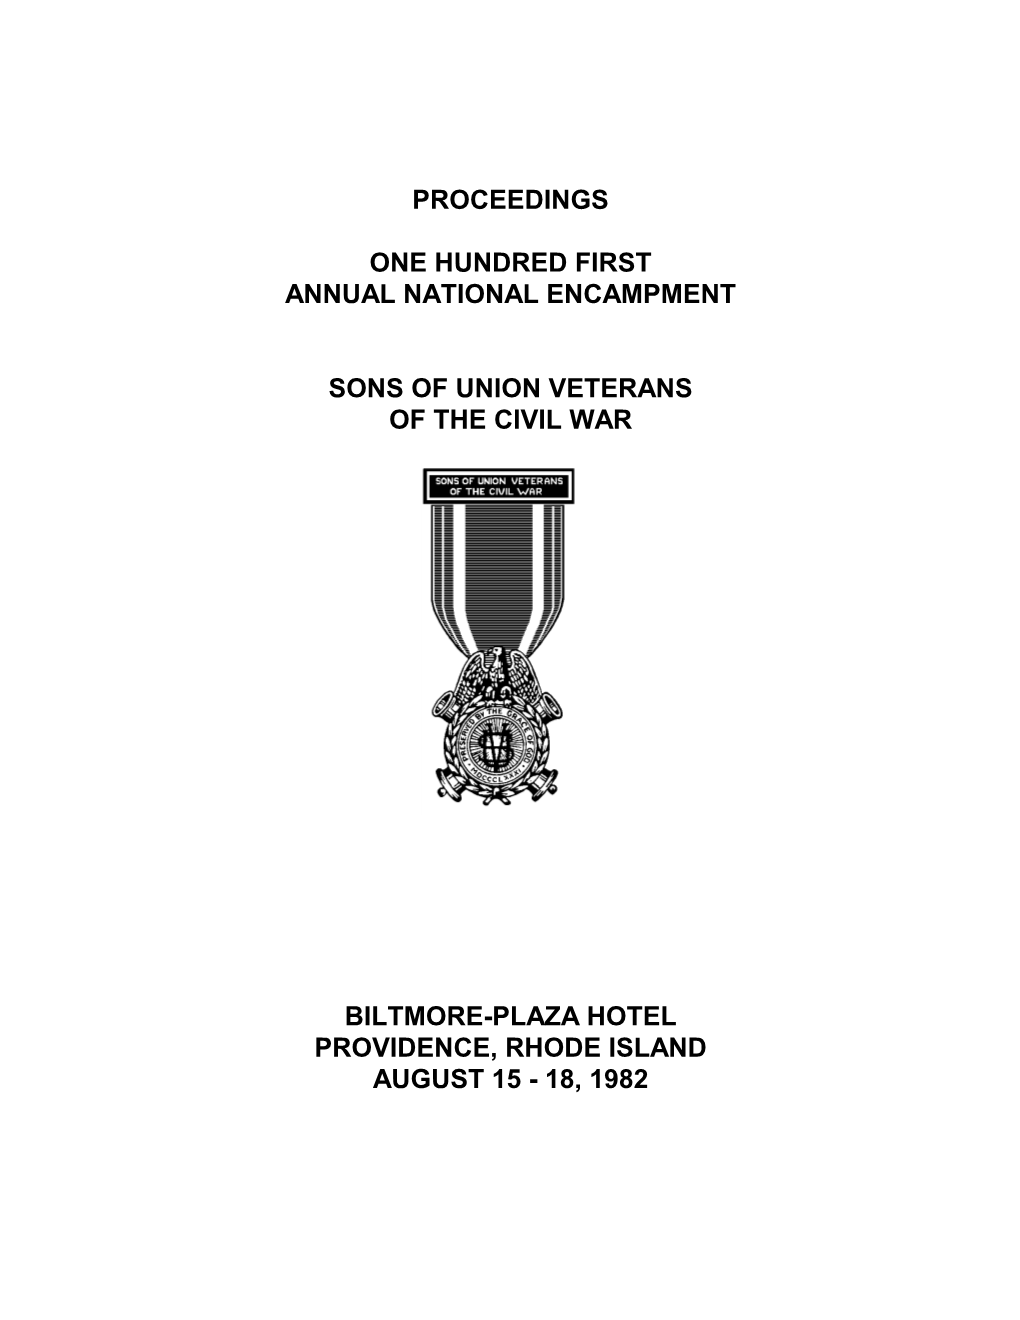 1982 Proceedings One Hundred First Annual National Encampment Sons of Union Veterans of the Civil War